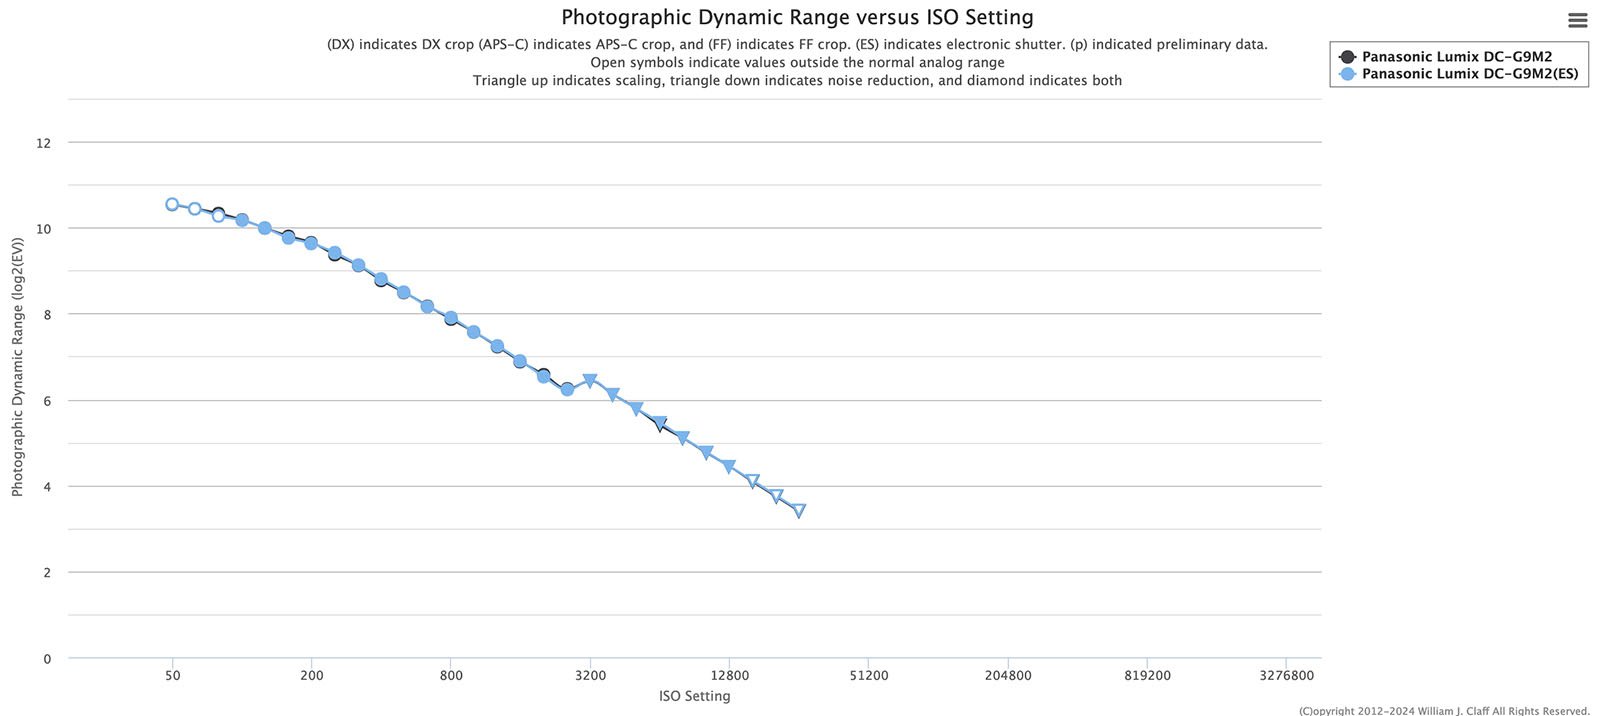 Graph titled "Photographic Dynamic Range versus ISO Setting" showing measurements for Panasonic Lumix DC-G9M2 and Panasonic Lumix DC-S5M2X. The dynamic range decreases as ISO increases, with data points plotted from ISO 50 to 51200.